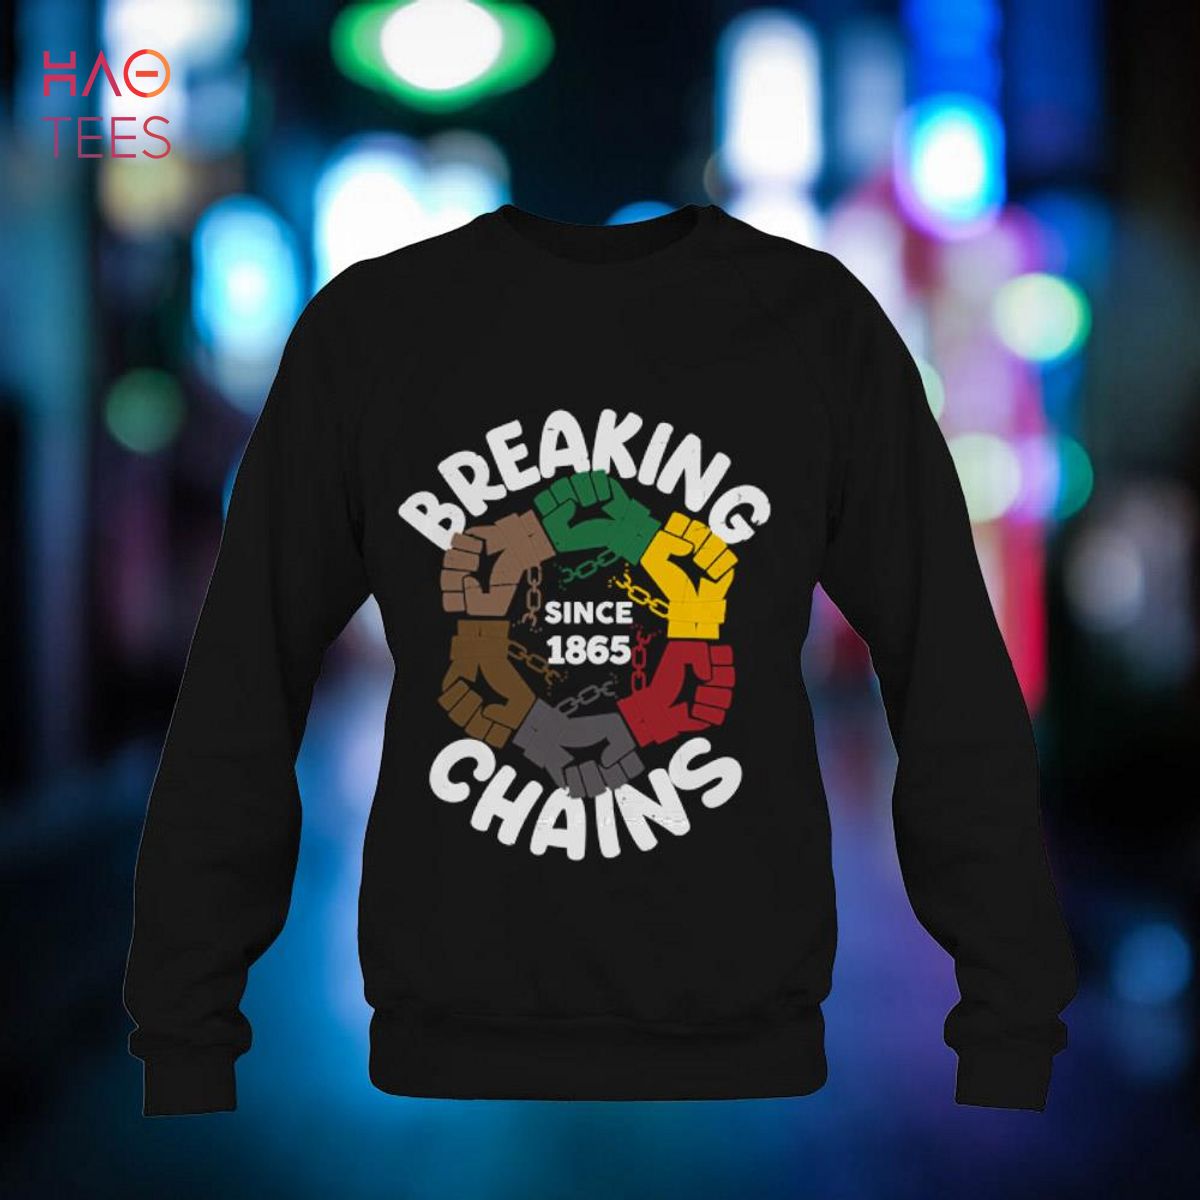 Breaking Every Chain Since 1865 Juneteenth Black History Shirt